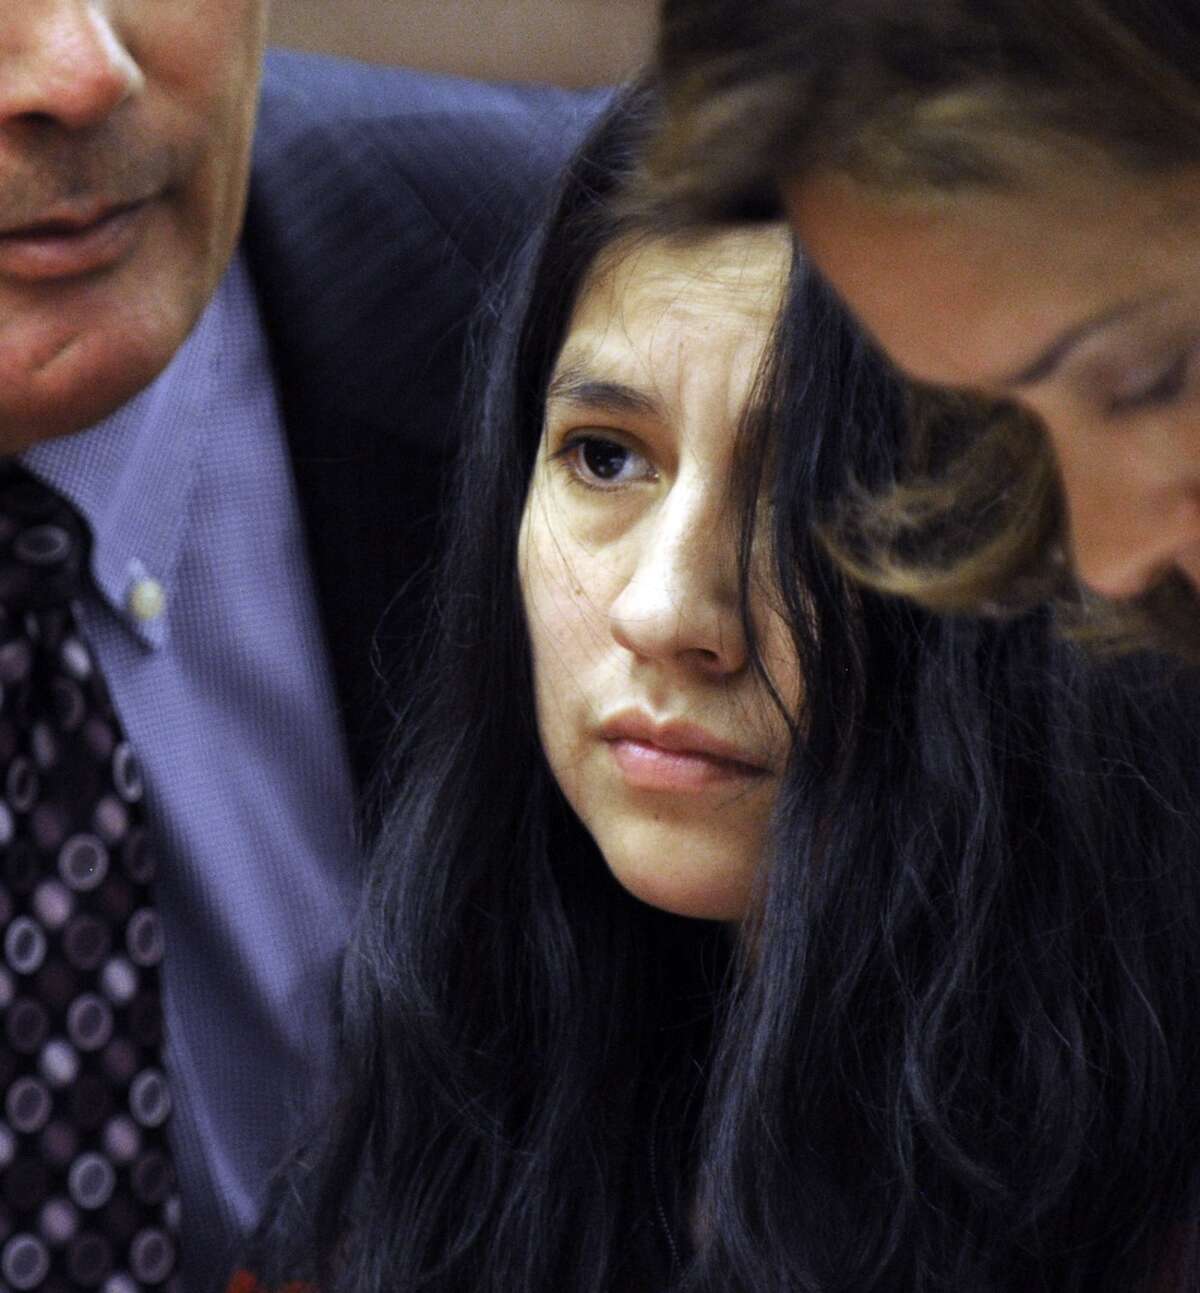 Lidia Quilligana, 31, pleaded not guilty Wednesday, April 22, 2015. Quilligana, center, appeared in State Superior Court in Danbury, Conn. and was aided by interpreter Javier Lillo and represented by her attorney Jennifer Tunnard.